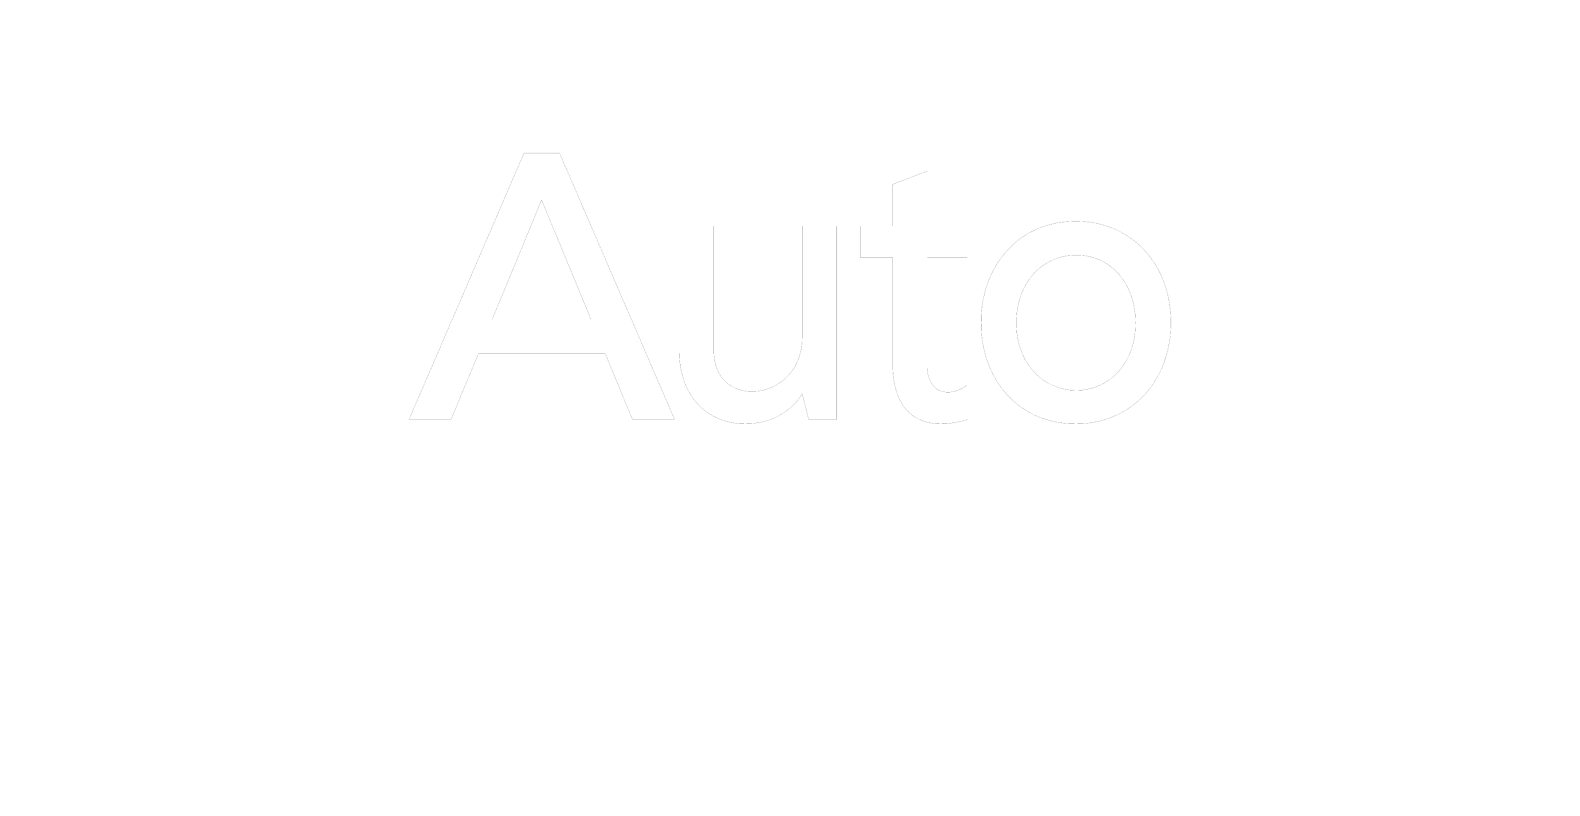 AutoScout24 logo in white